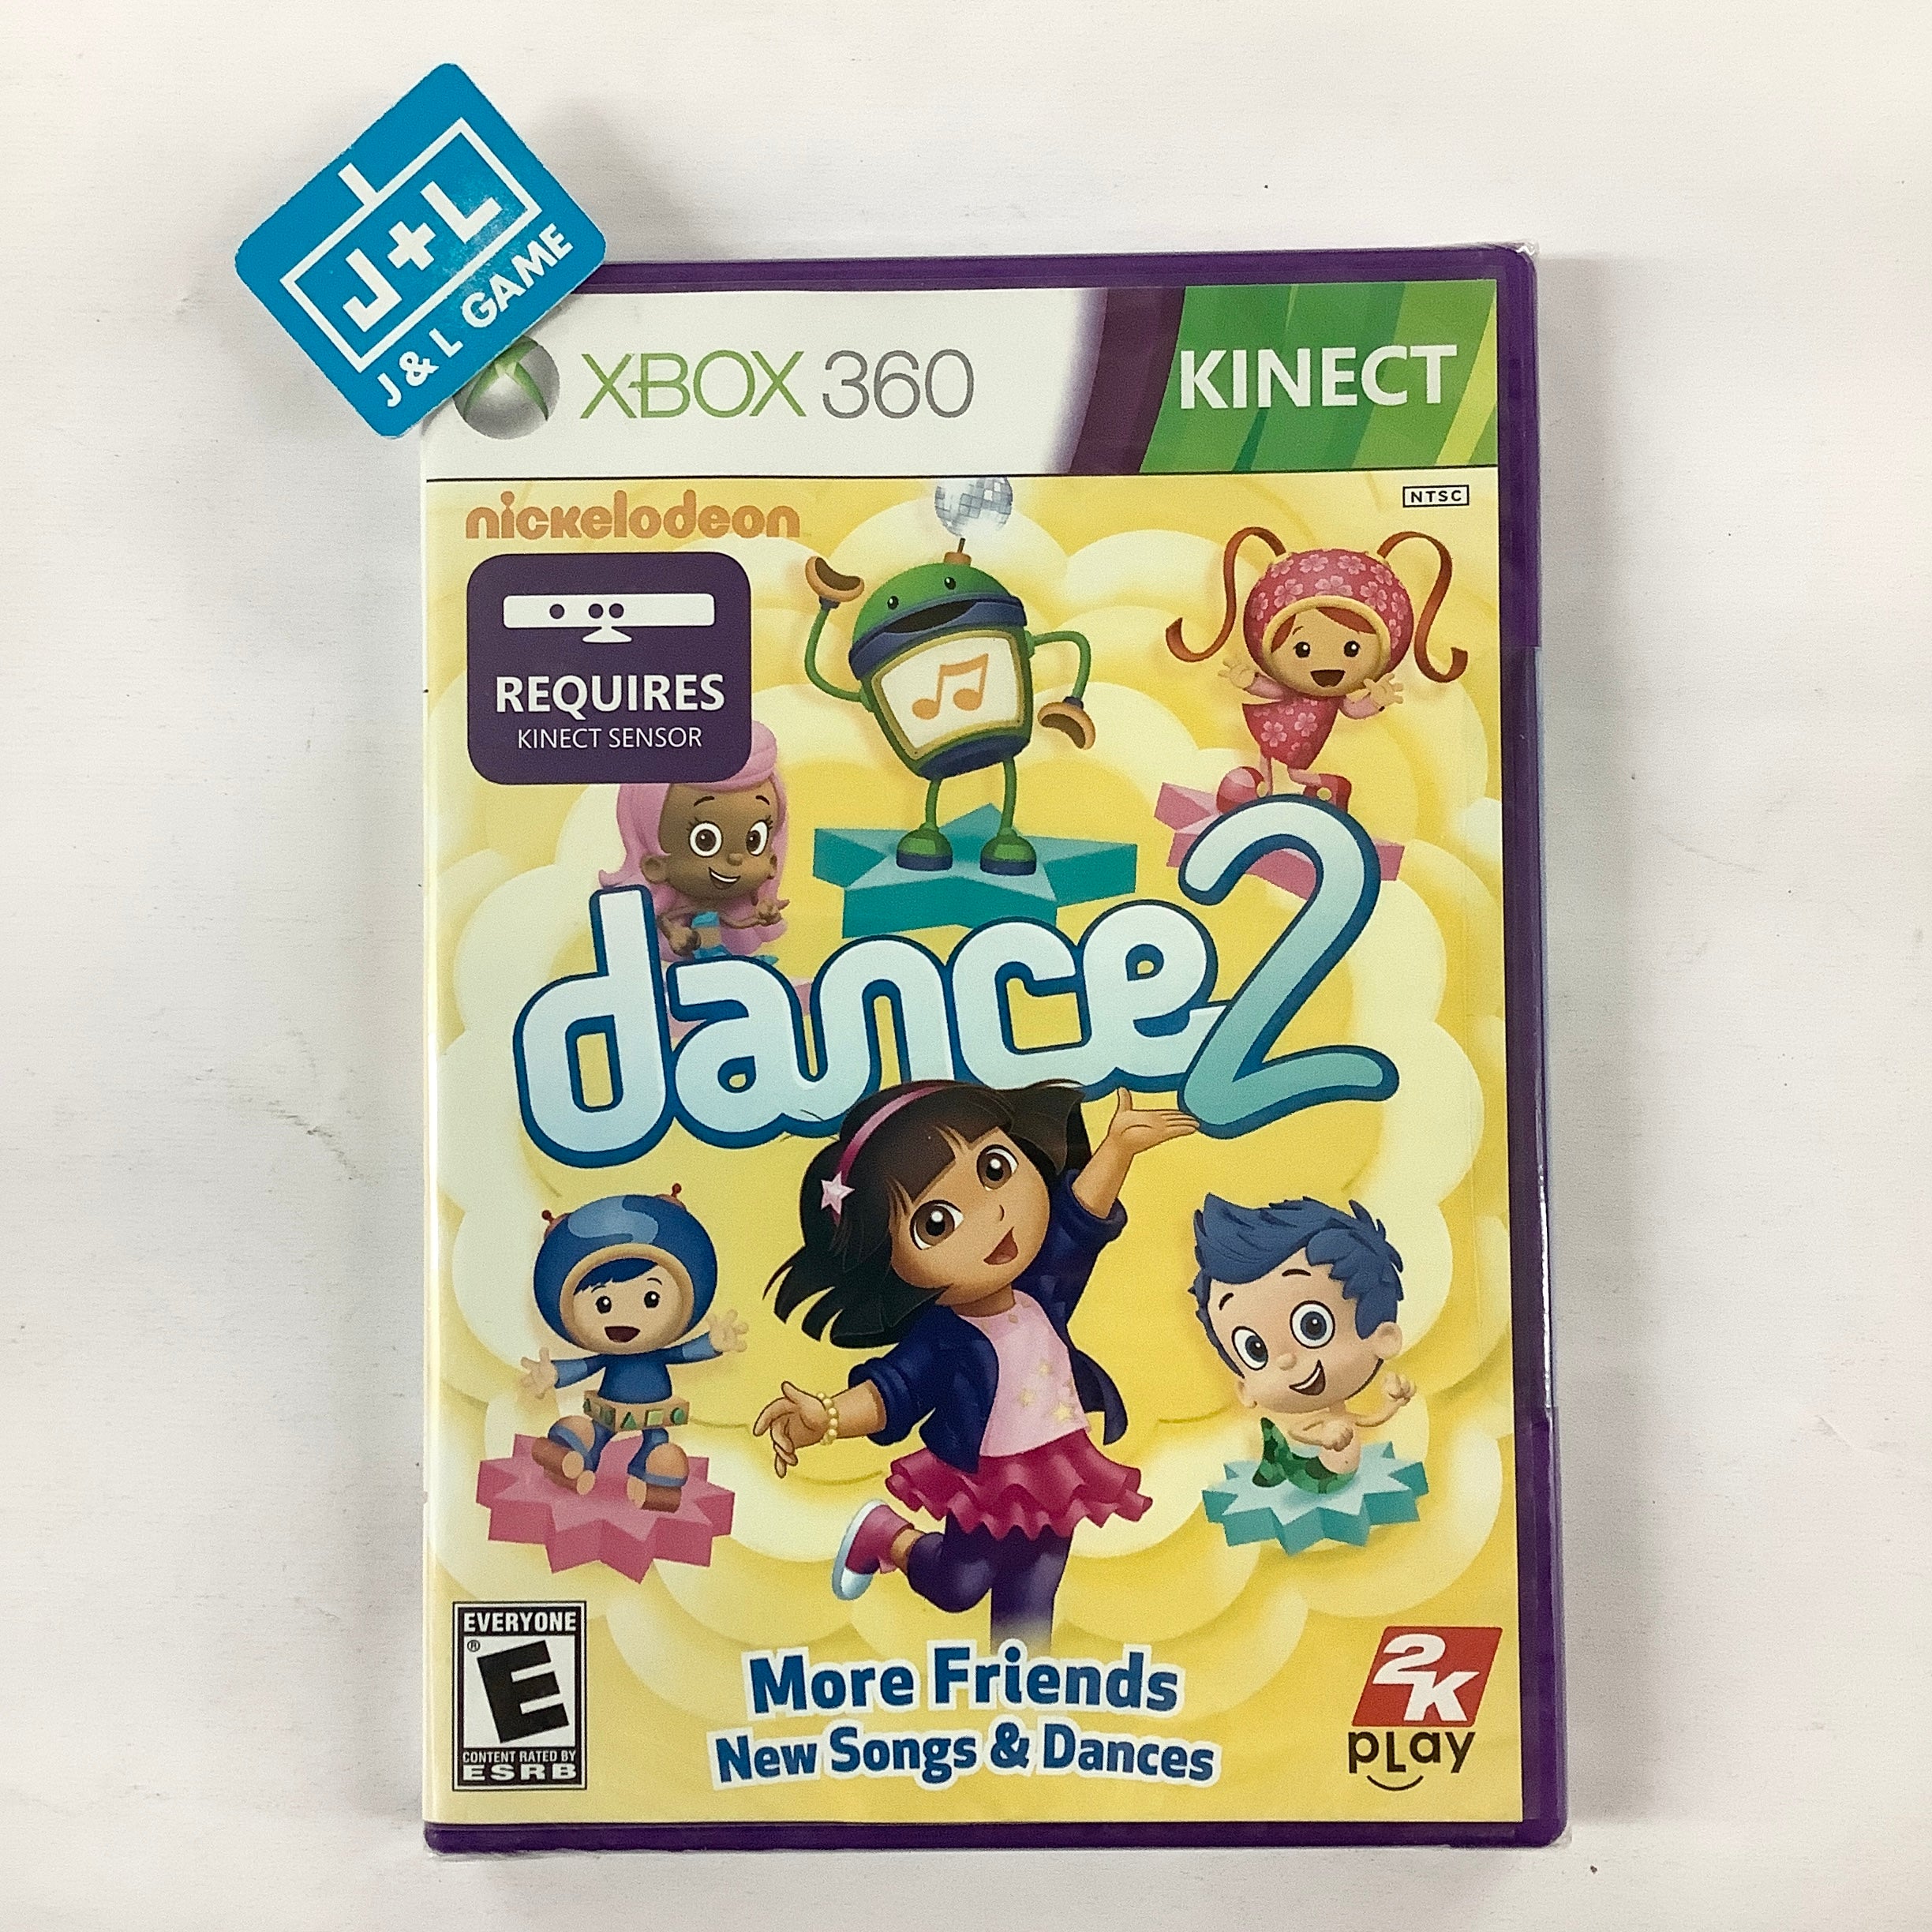 Nickelodeon Dance 2 (Kinect Required) - Xbox 360 Video Games 2K Play   